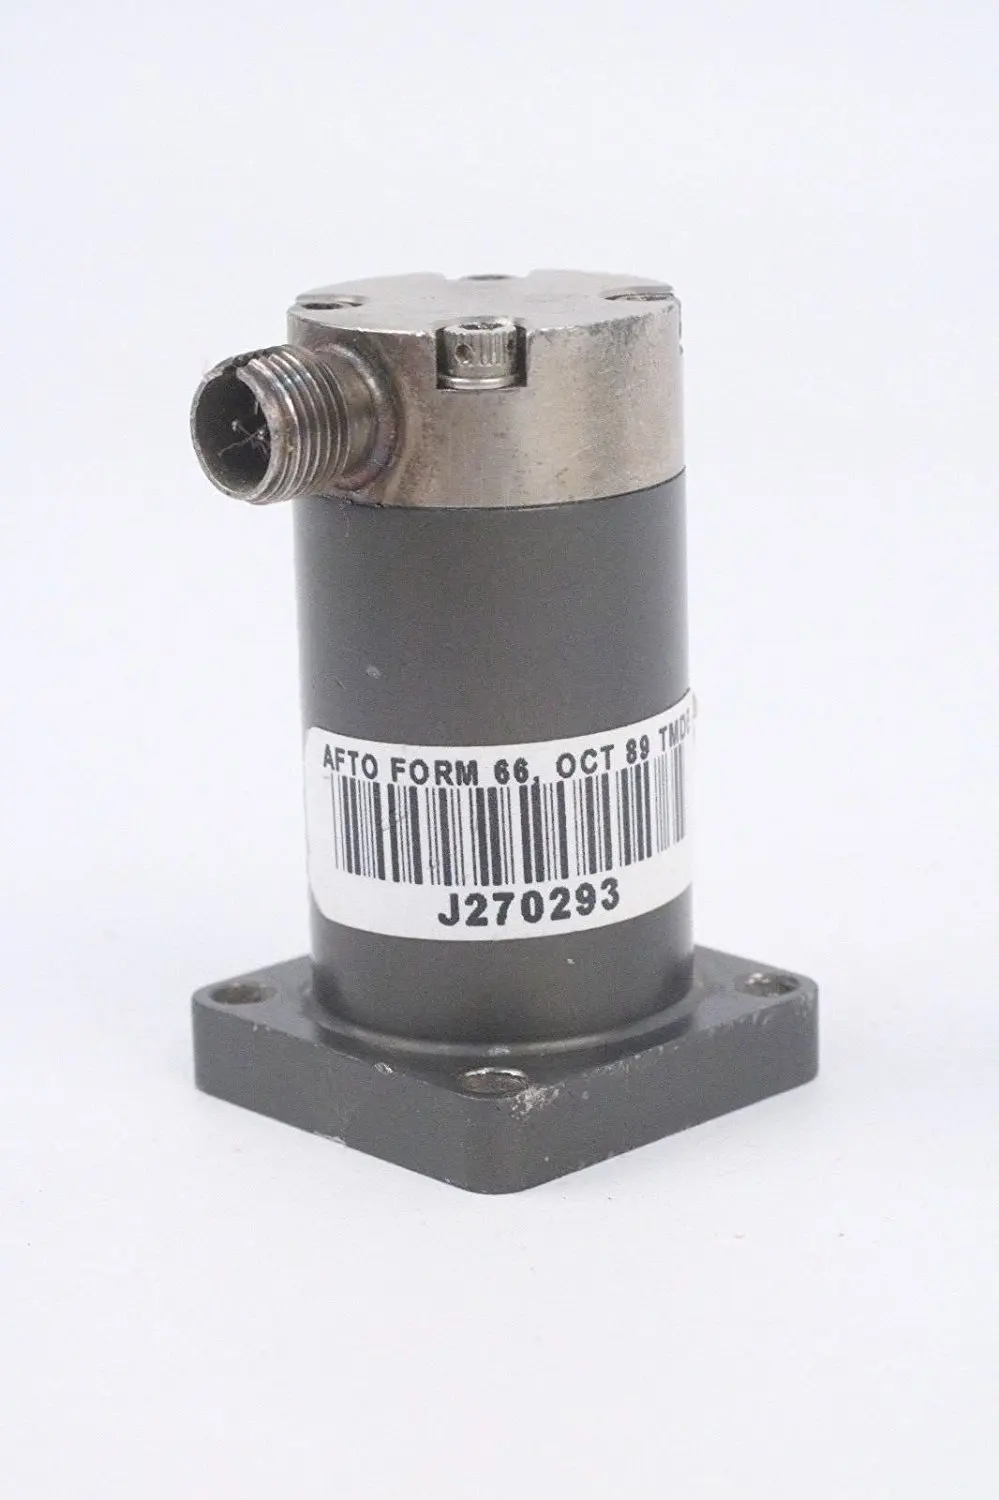 Cheap Linear Velocity Transducer, find Linear Velocity Transducer deals on line at 0